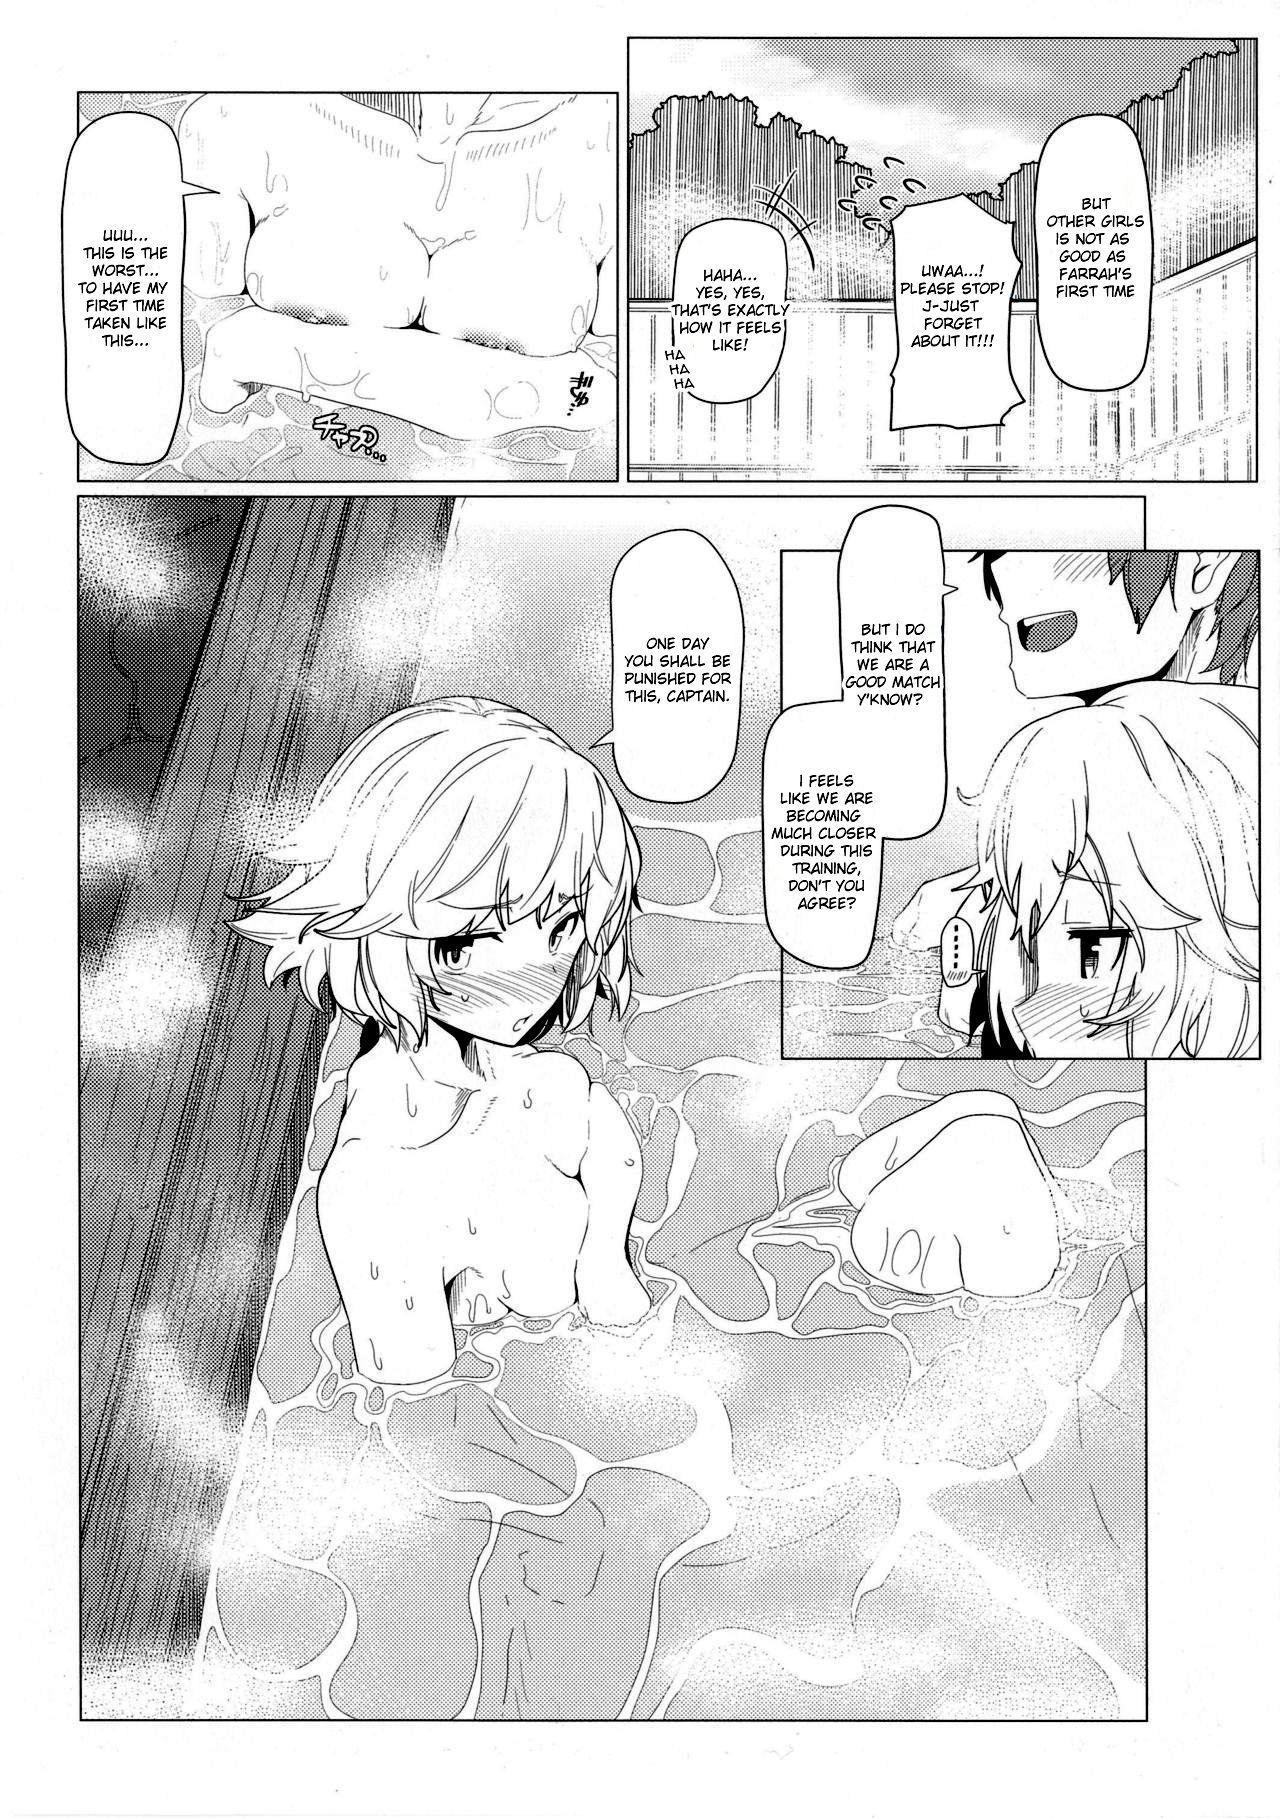 Argenta GIRLFriend's 10 - Granblue fantasy Butts - Page 4